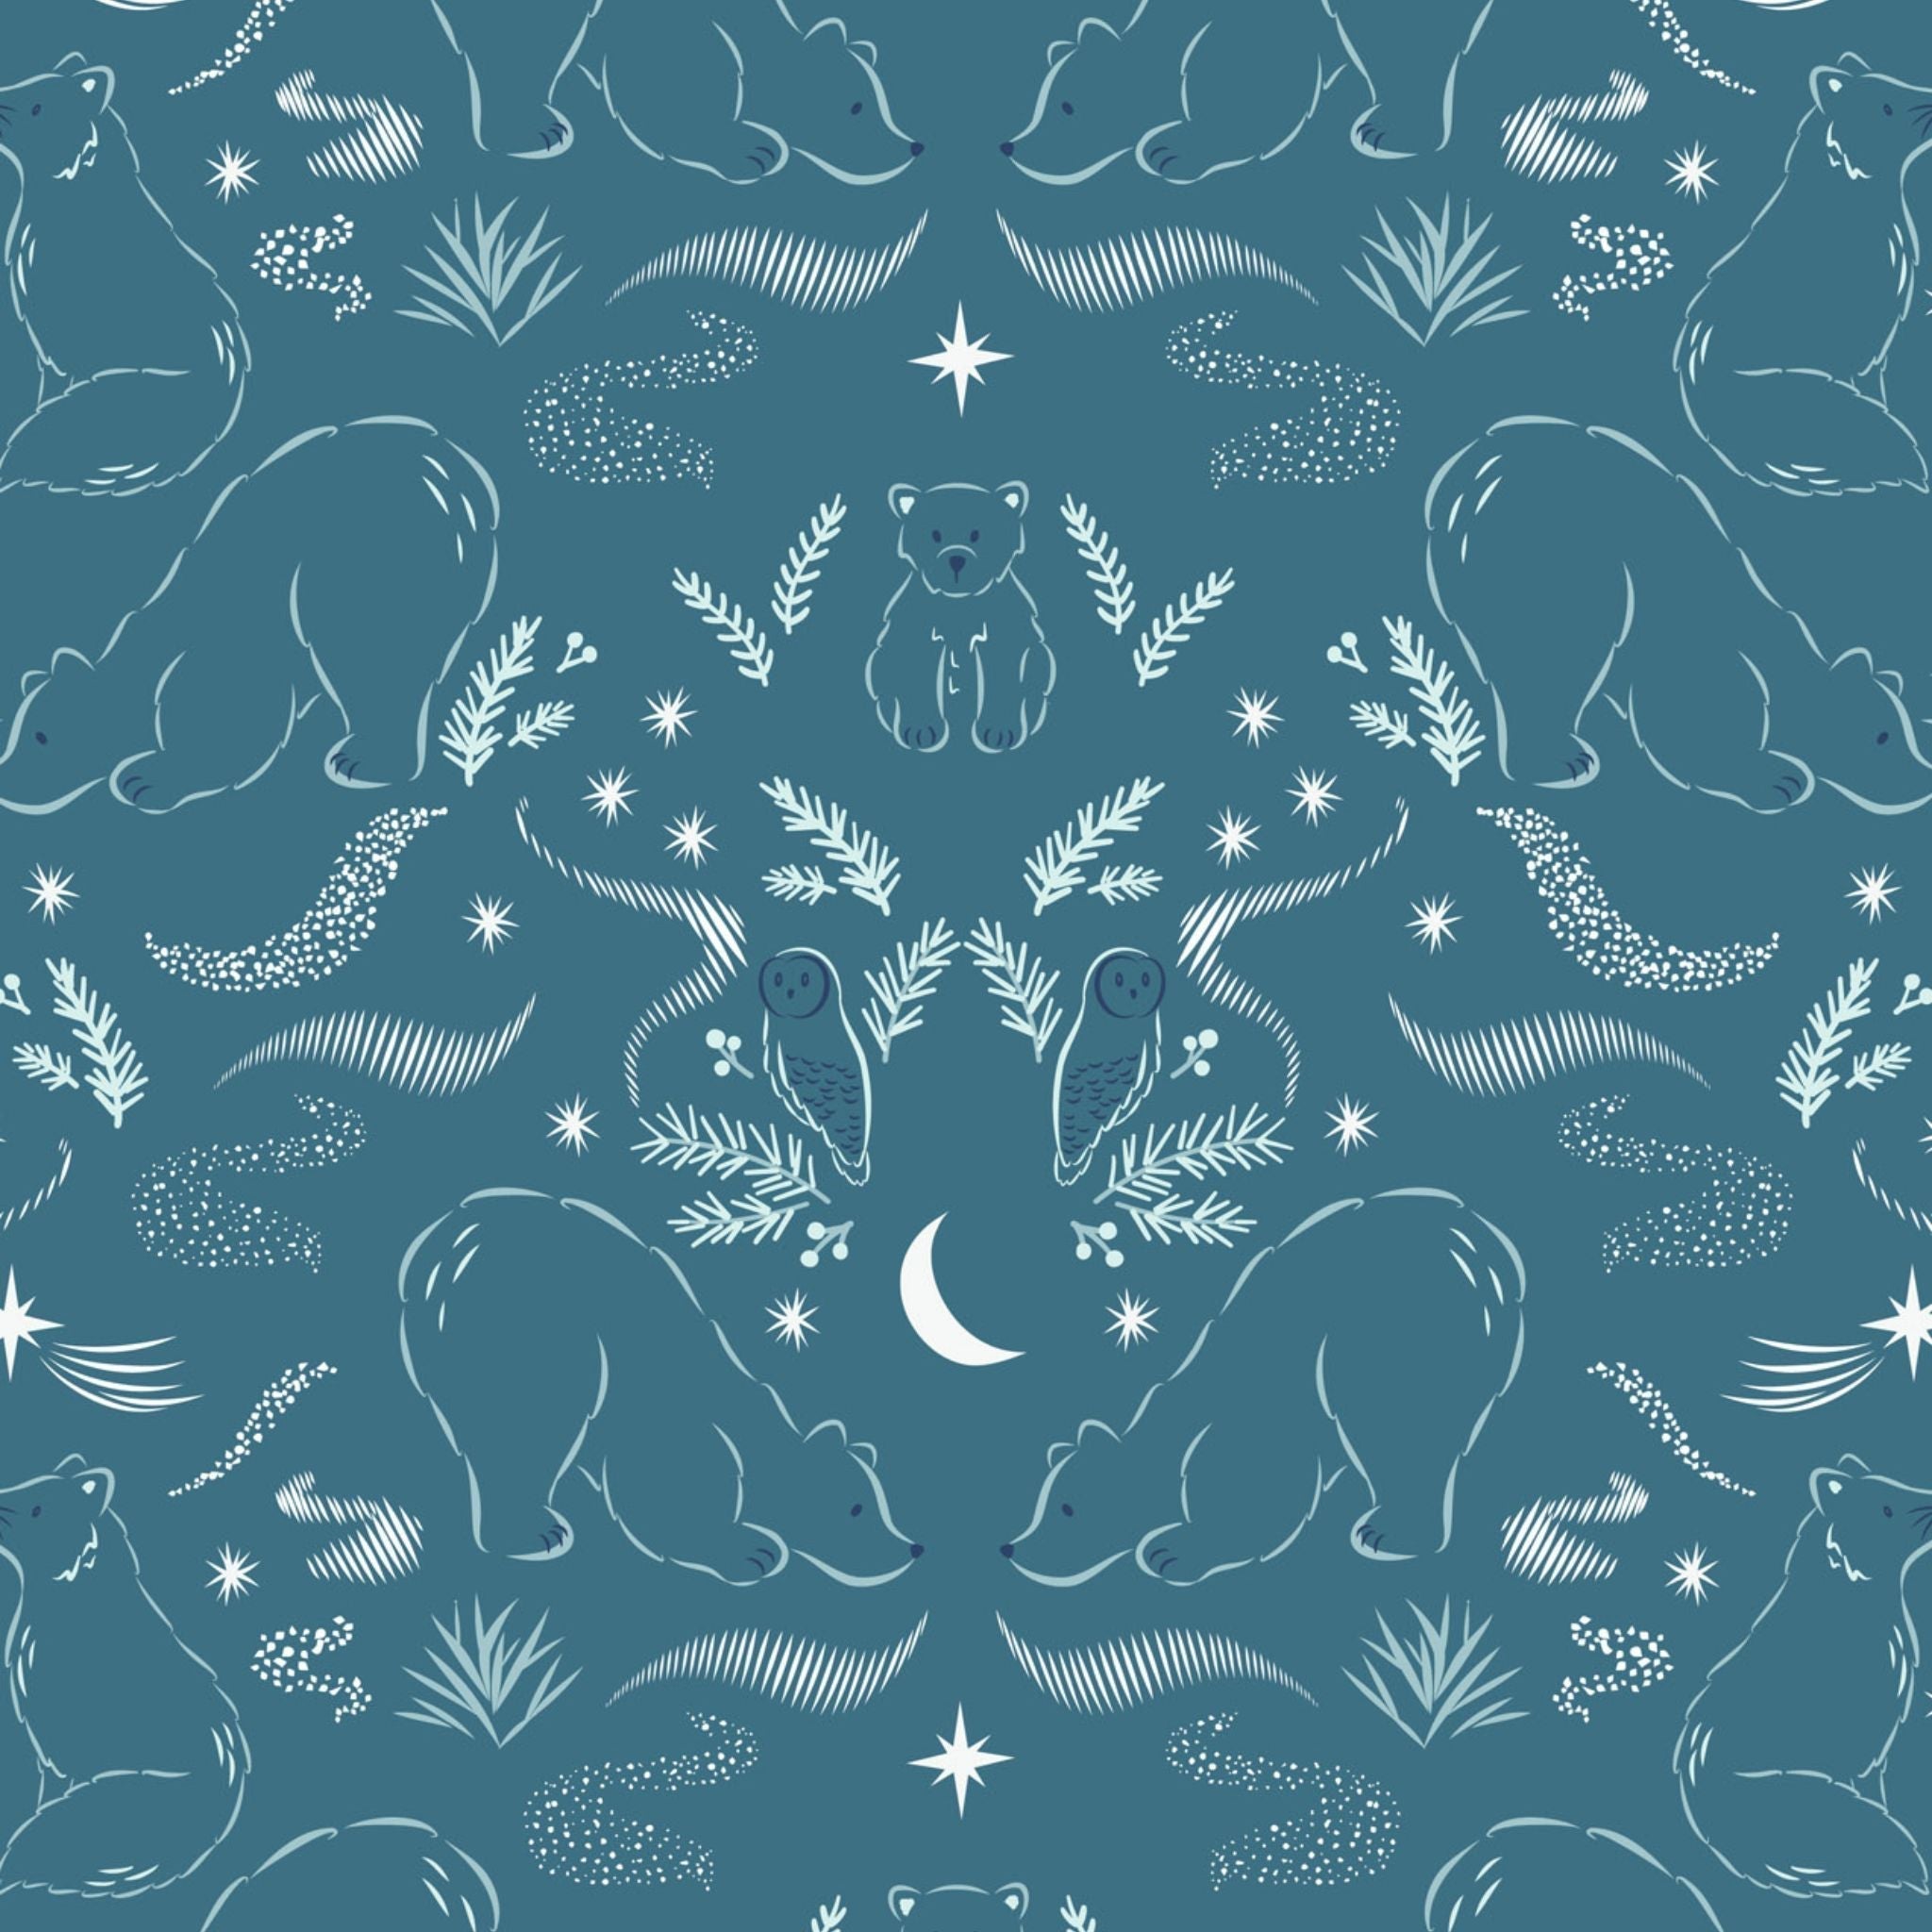 Polar bears, owls and arctic fox on teal cotton - Arctic Adventure by Lewis and Irene